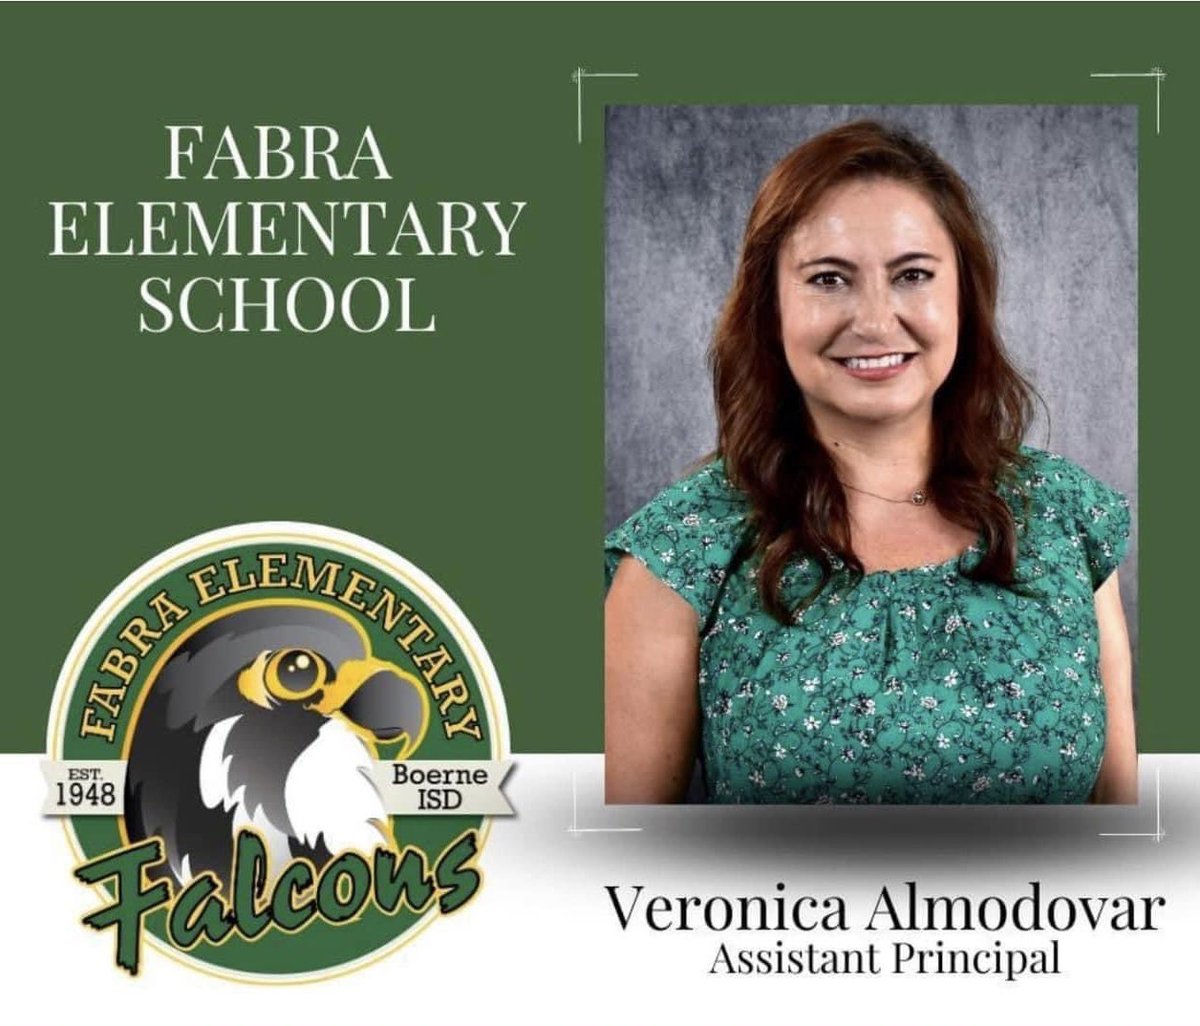 It is National Assistant Principal Week! We are so thankful for Mrs. Almodovar and all the countless things she does for our staff and students! Thank you for ALL that you do, Mrs. Almodovar! #fabrafamily #bestofthebest